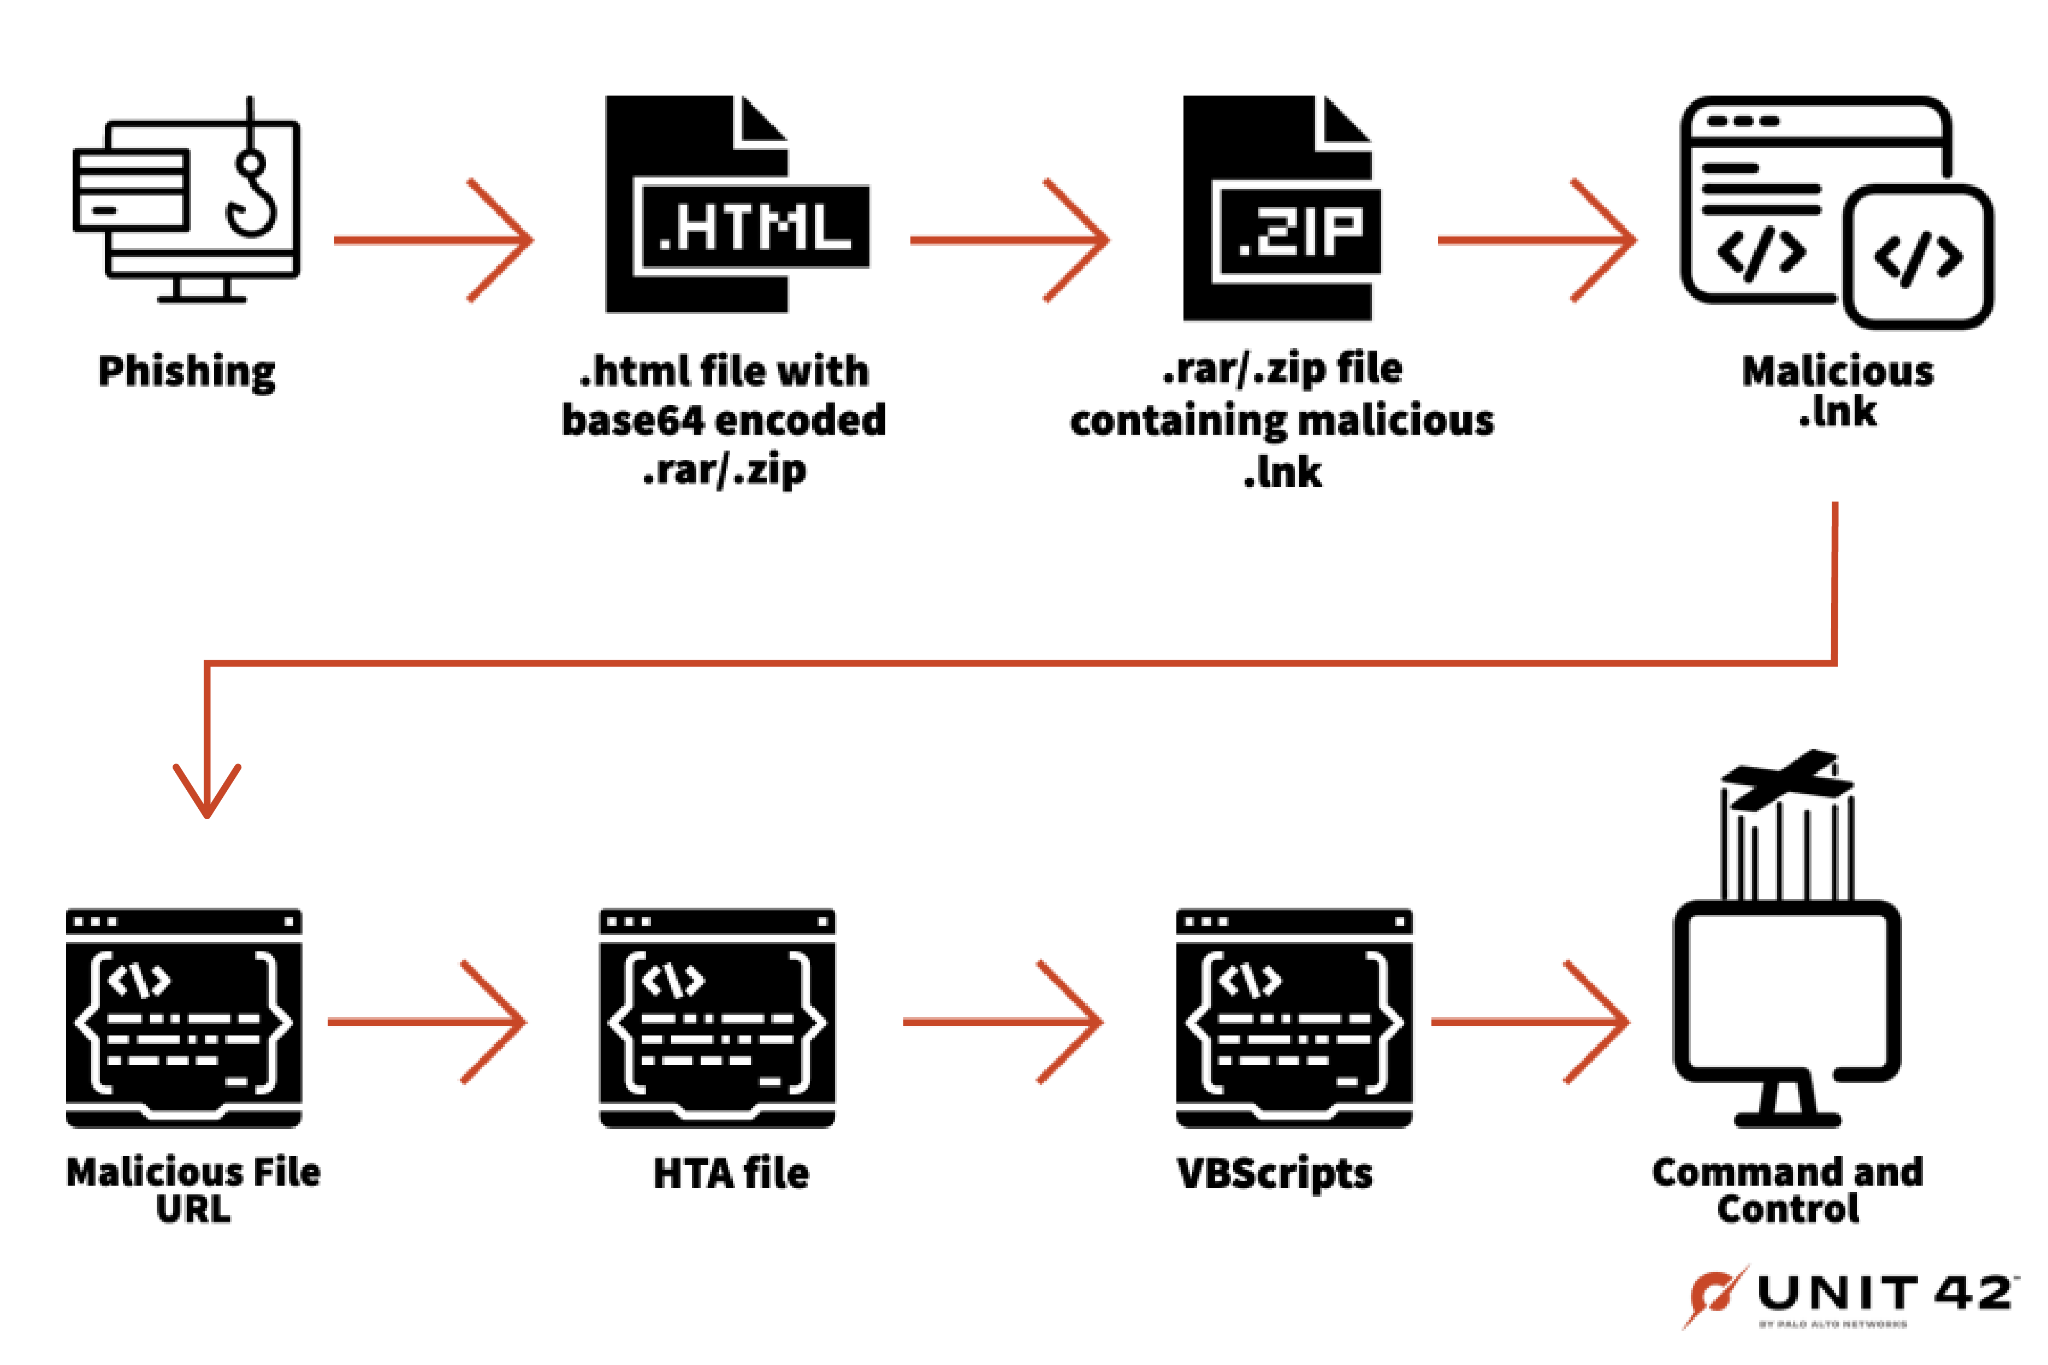 Image 7 is a diagram showing the exploitation path for phishing using malicious .lnk files. It begins with phishing and ends with VBScripts.